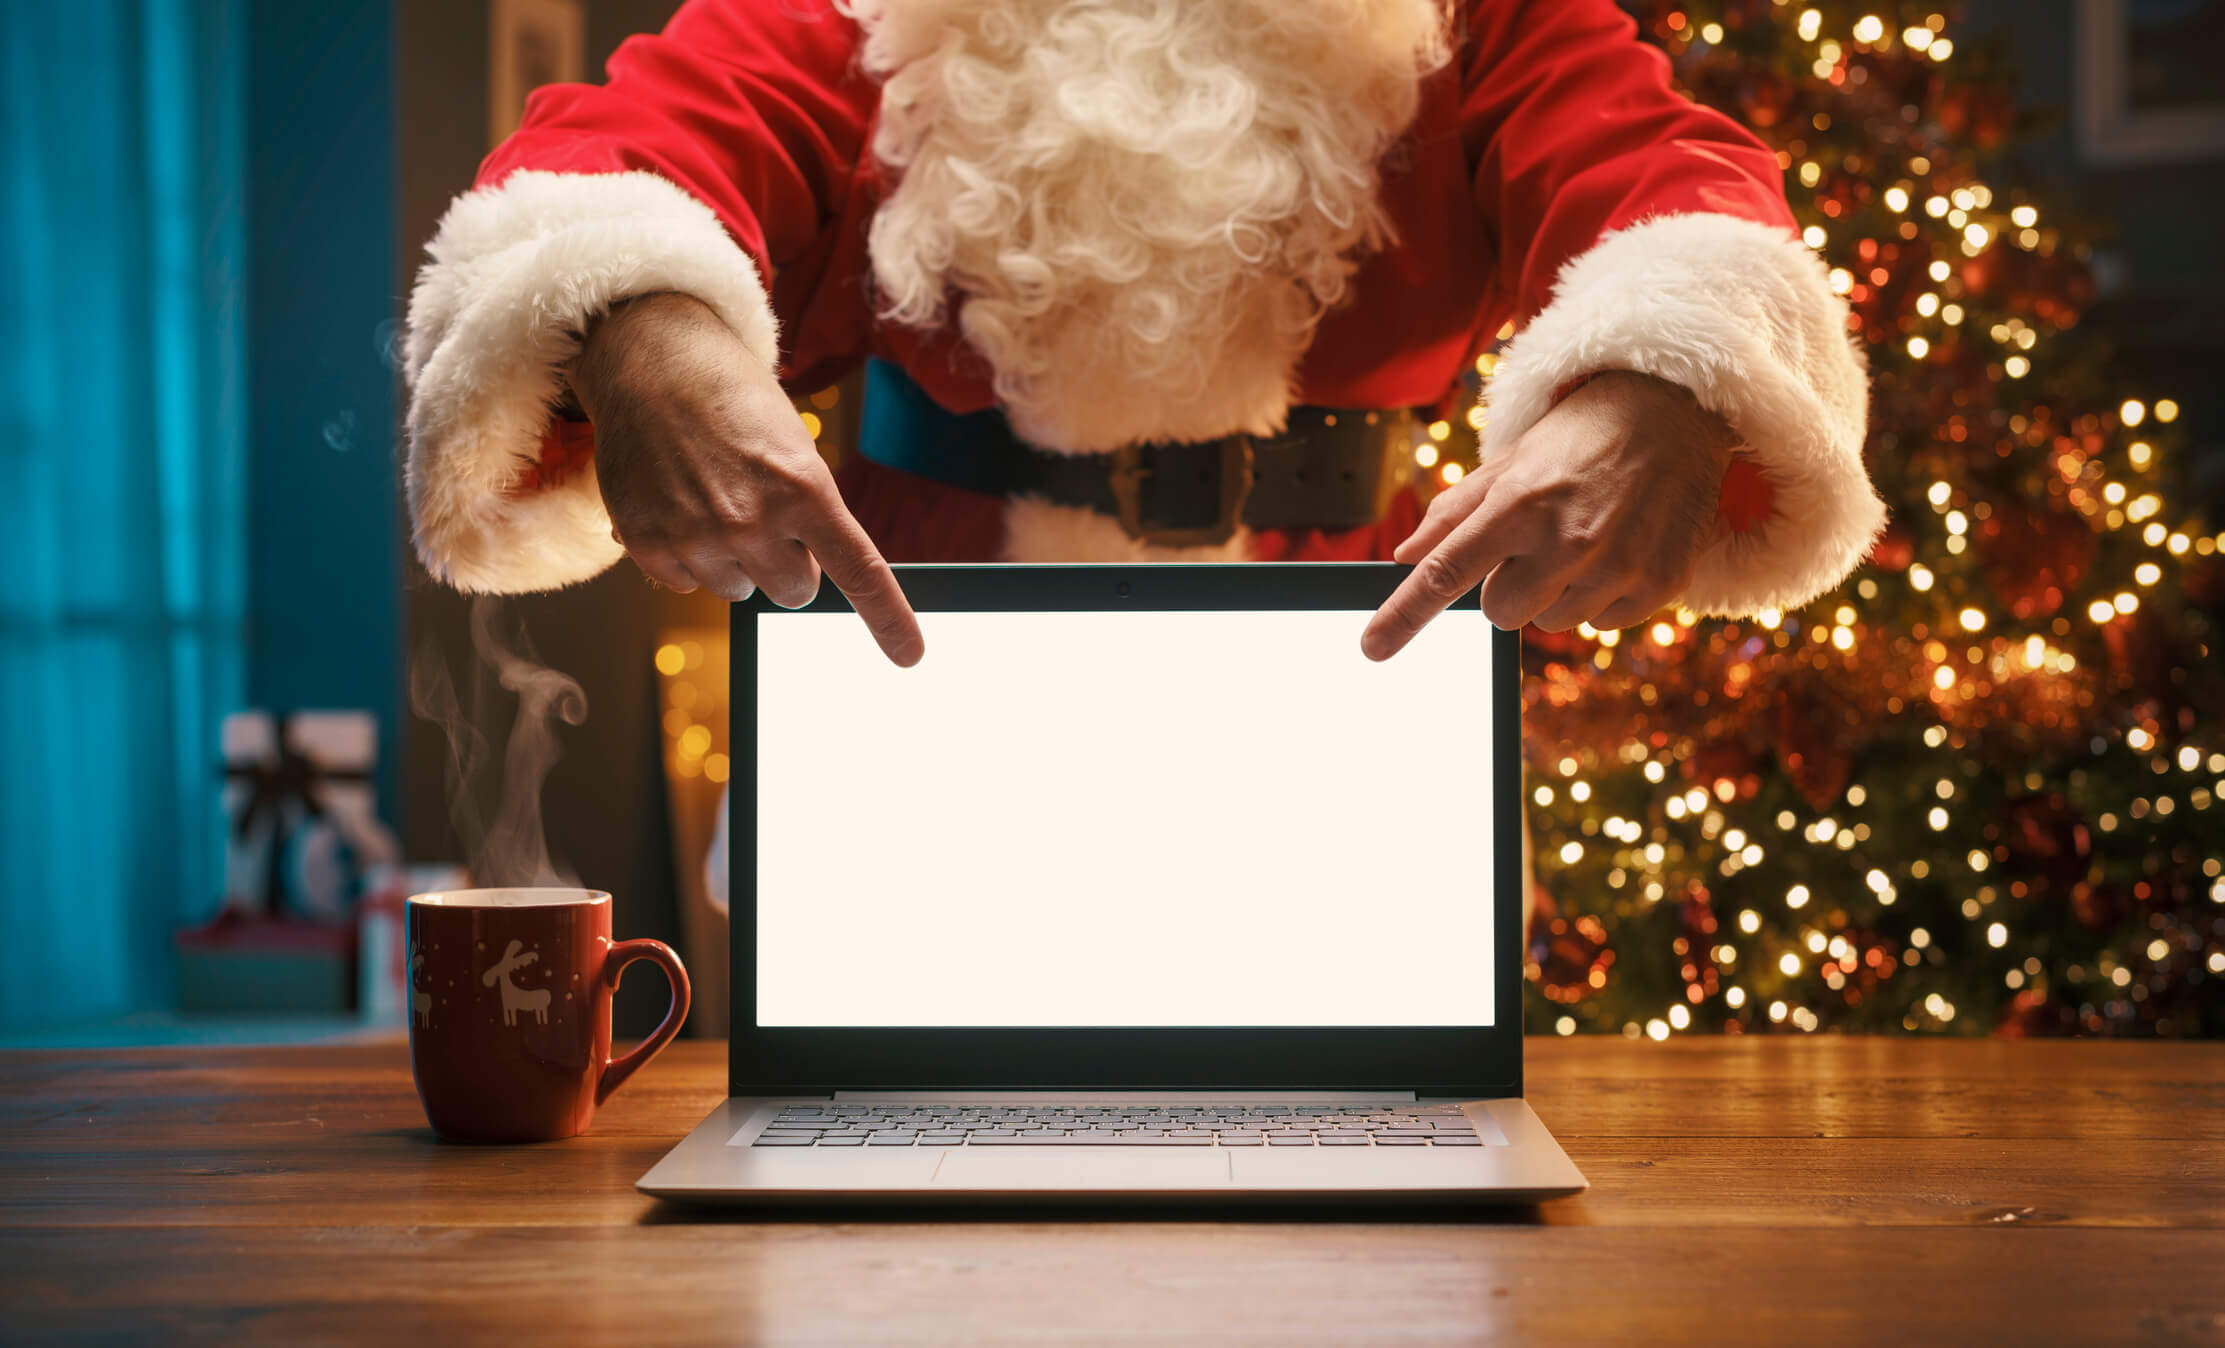 How to Get Your Website Ready for the Holiday Season